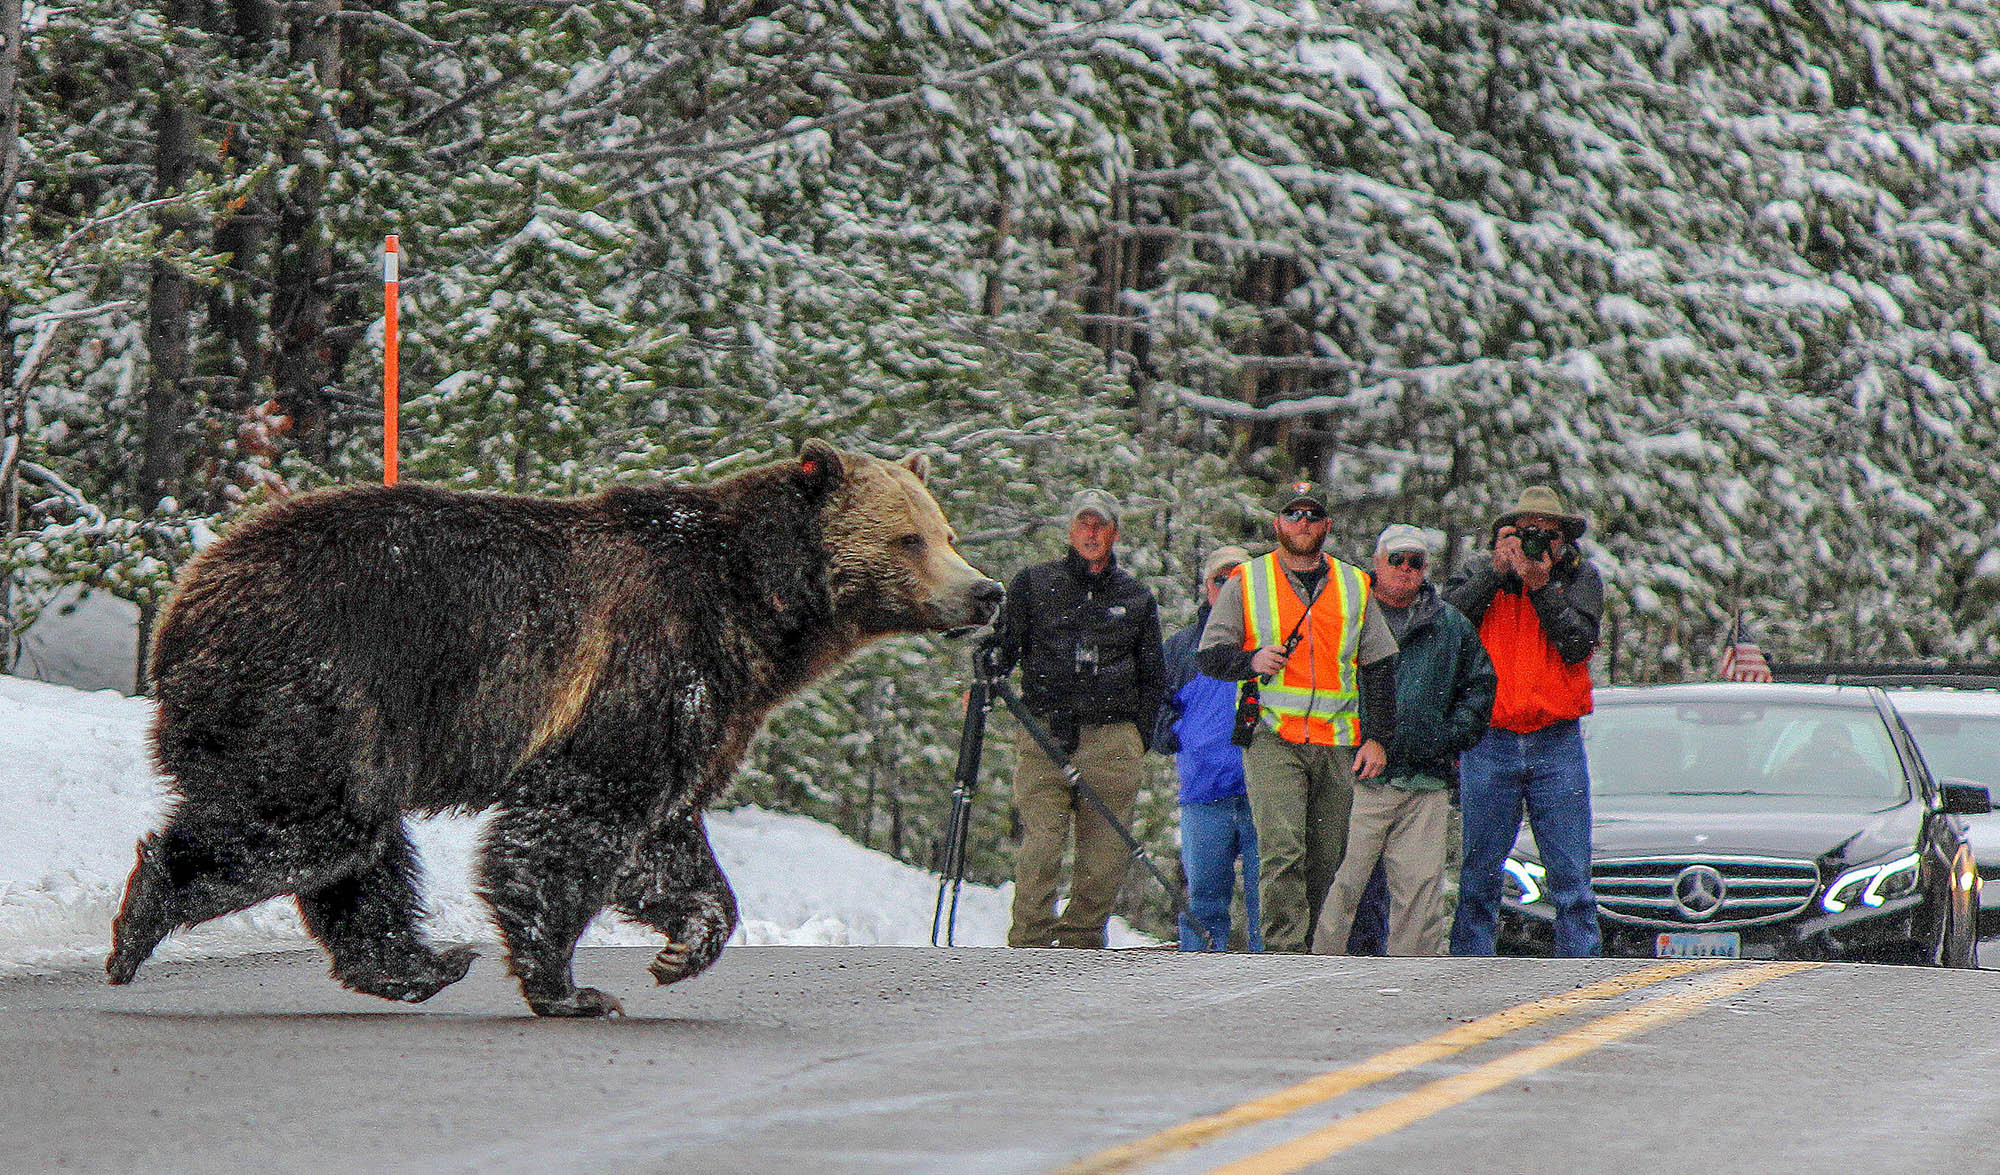 A bear encounters visitors and park rangers while crossing a road